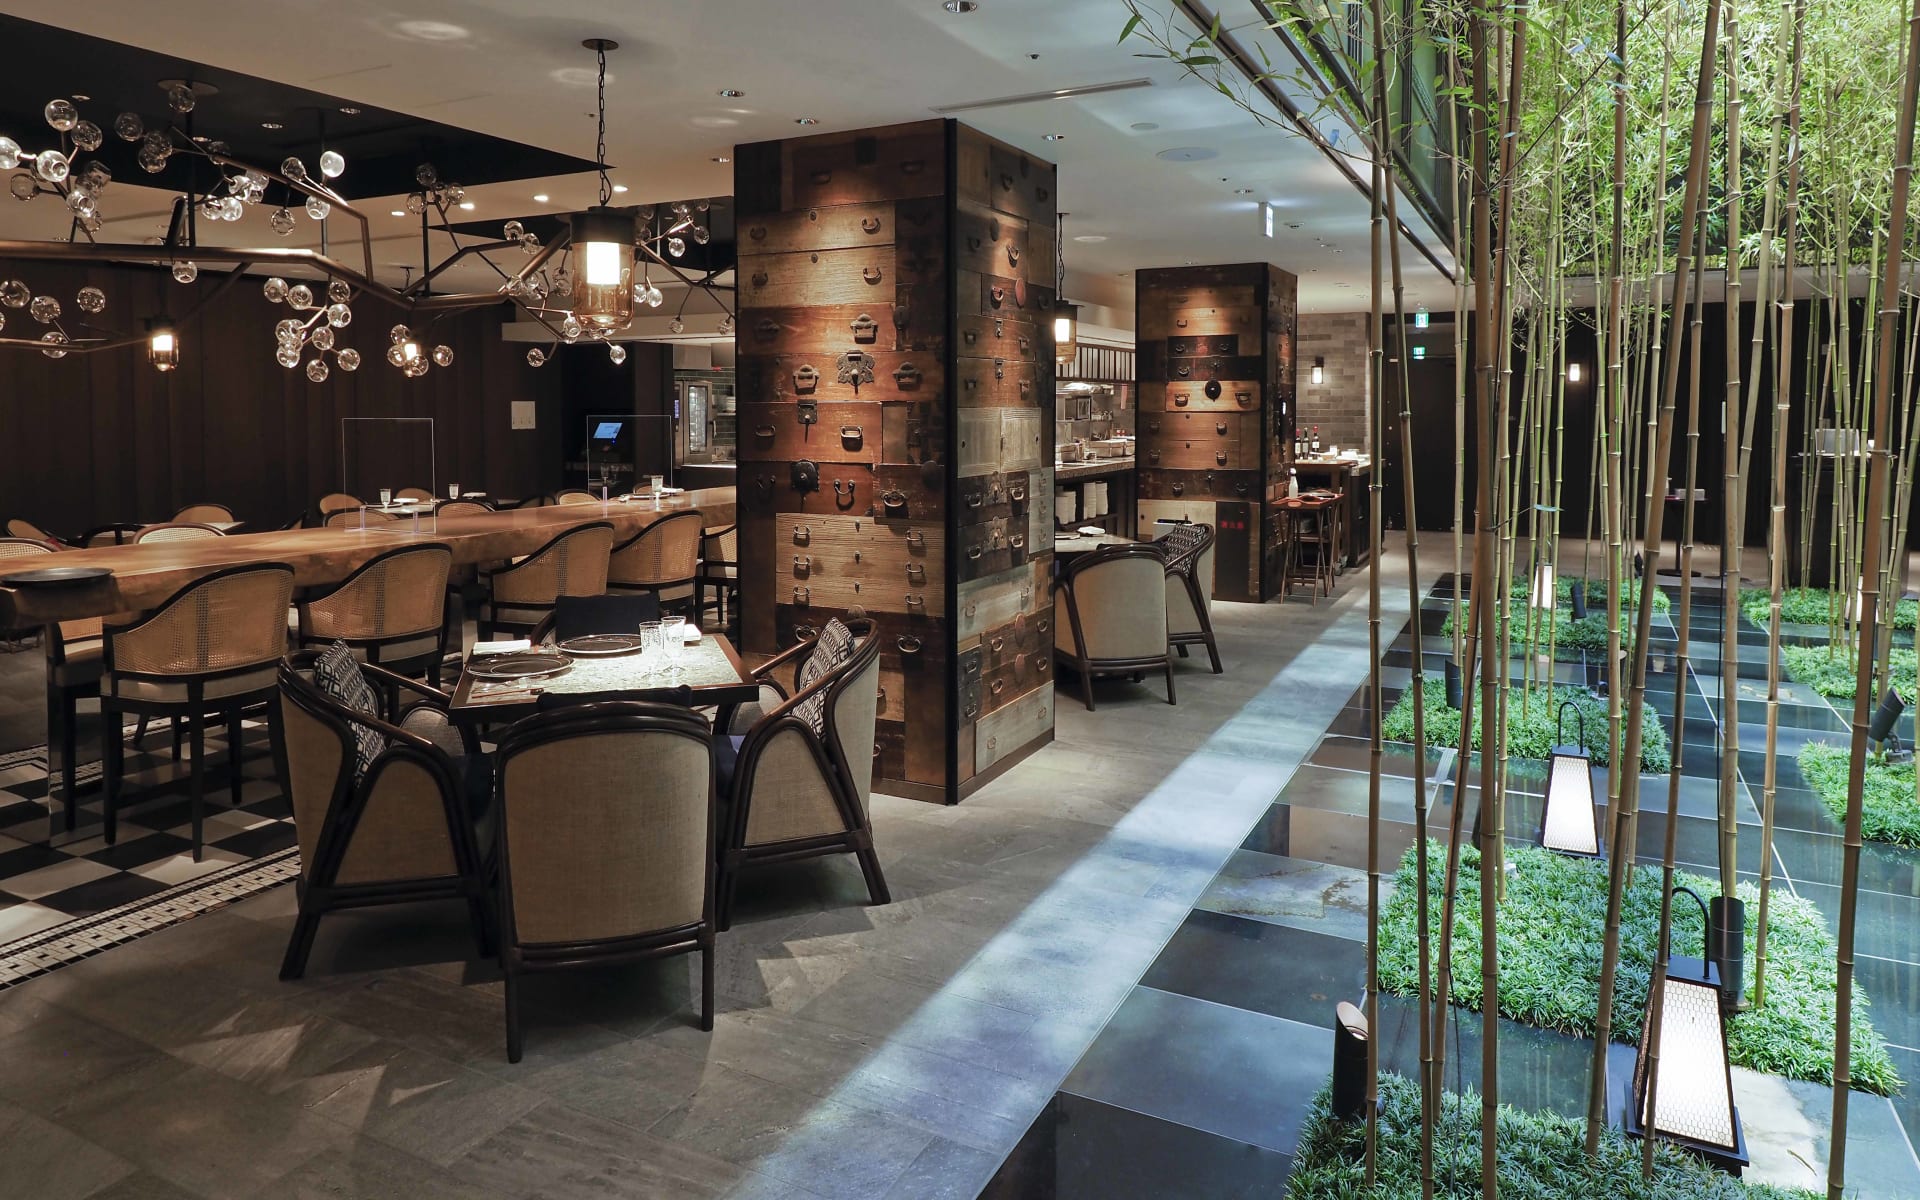 The restaurant at Dhawa Yura Hotel overlooks an indoor area with bamboo trees and greenery. 